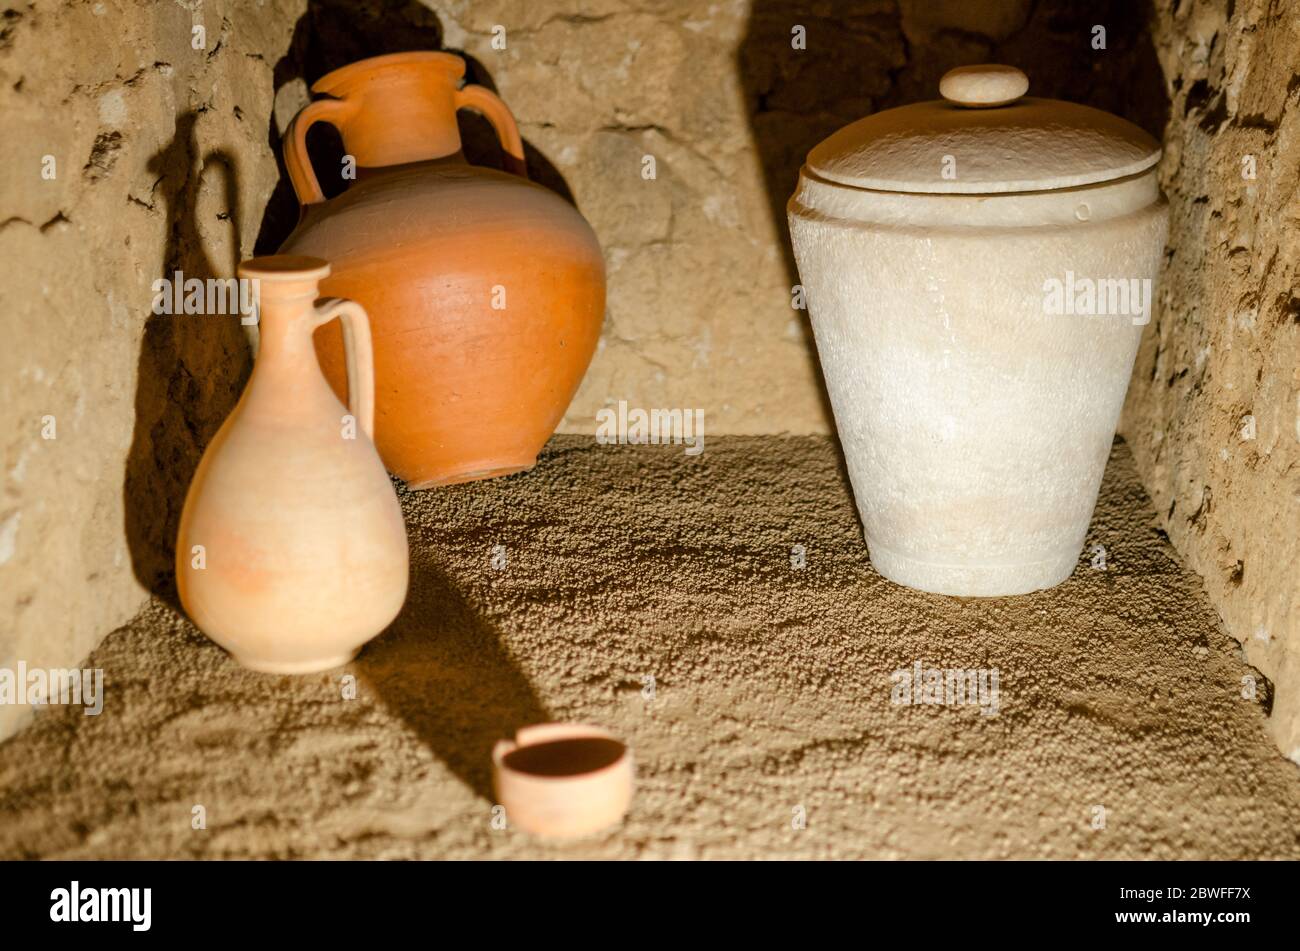 Ancient roman pottery in an antique tomb Stock Photo